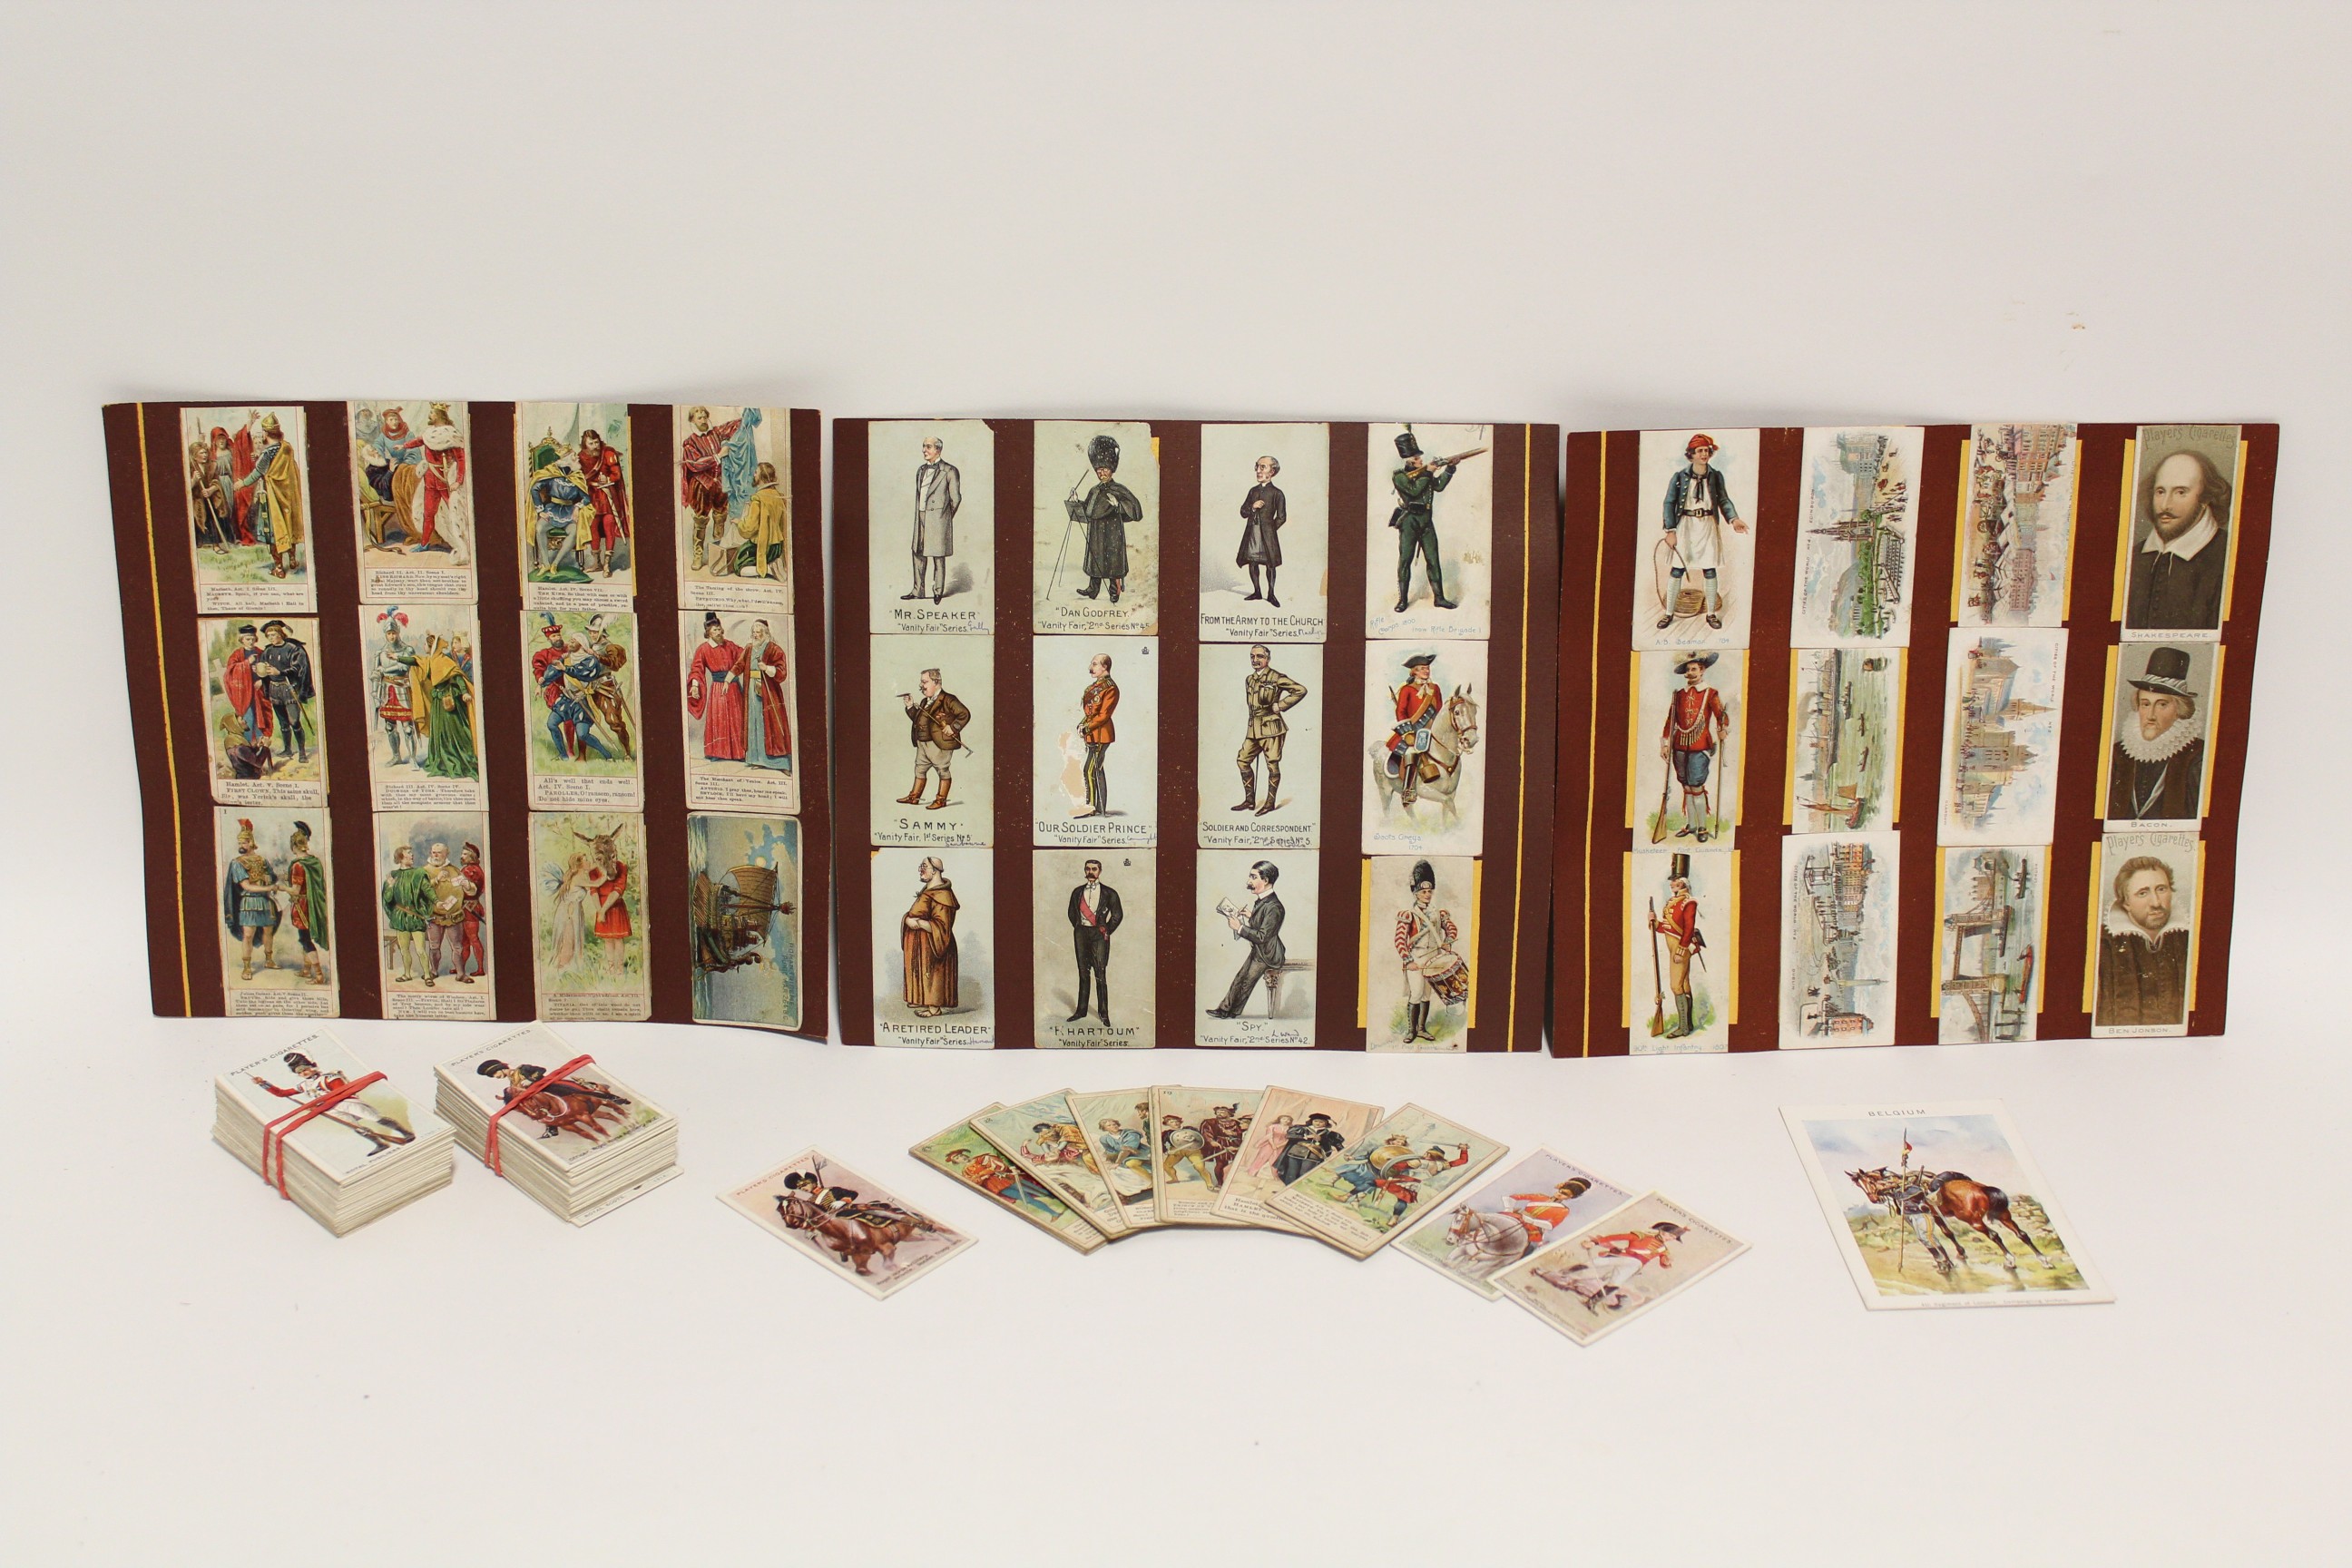 Approximately one hundred & seventy various cigarette cards – mostly Militaria, circa late 19th/